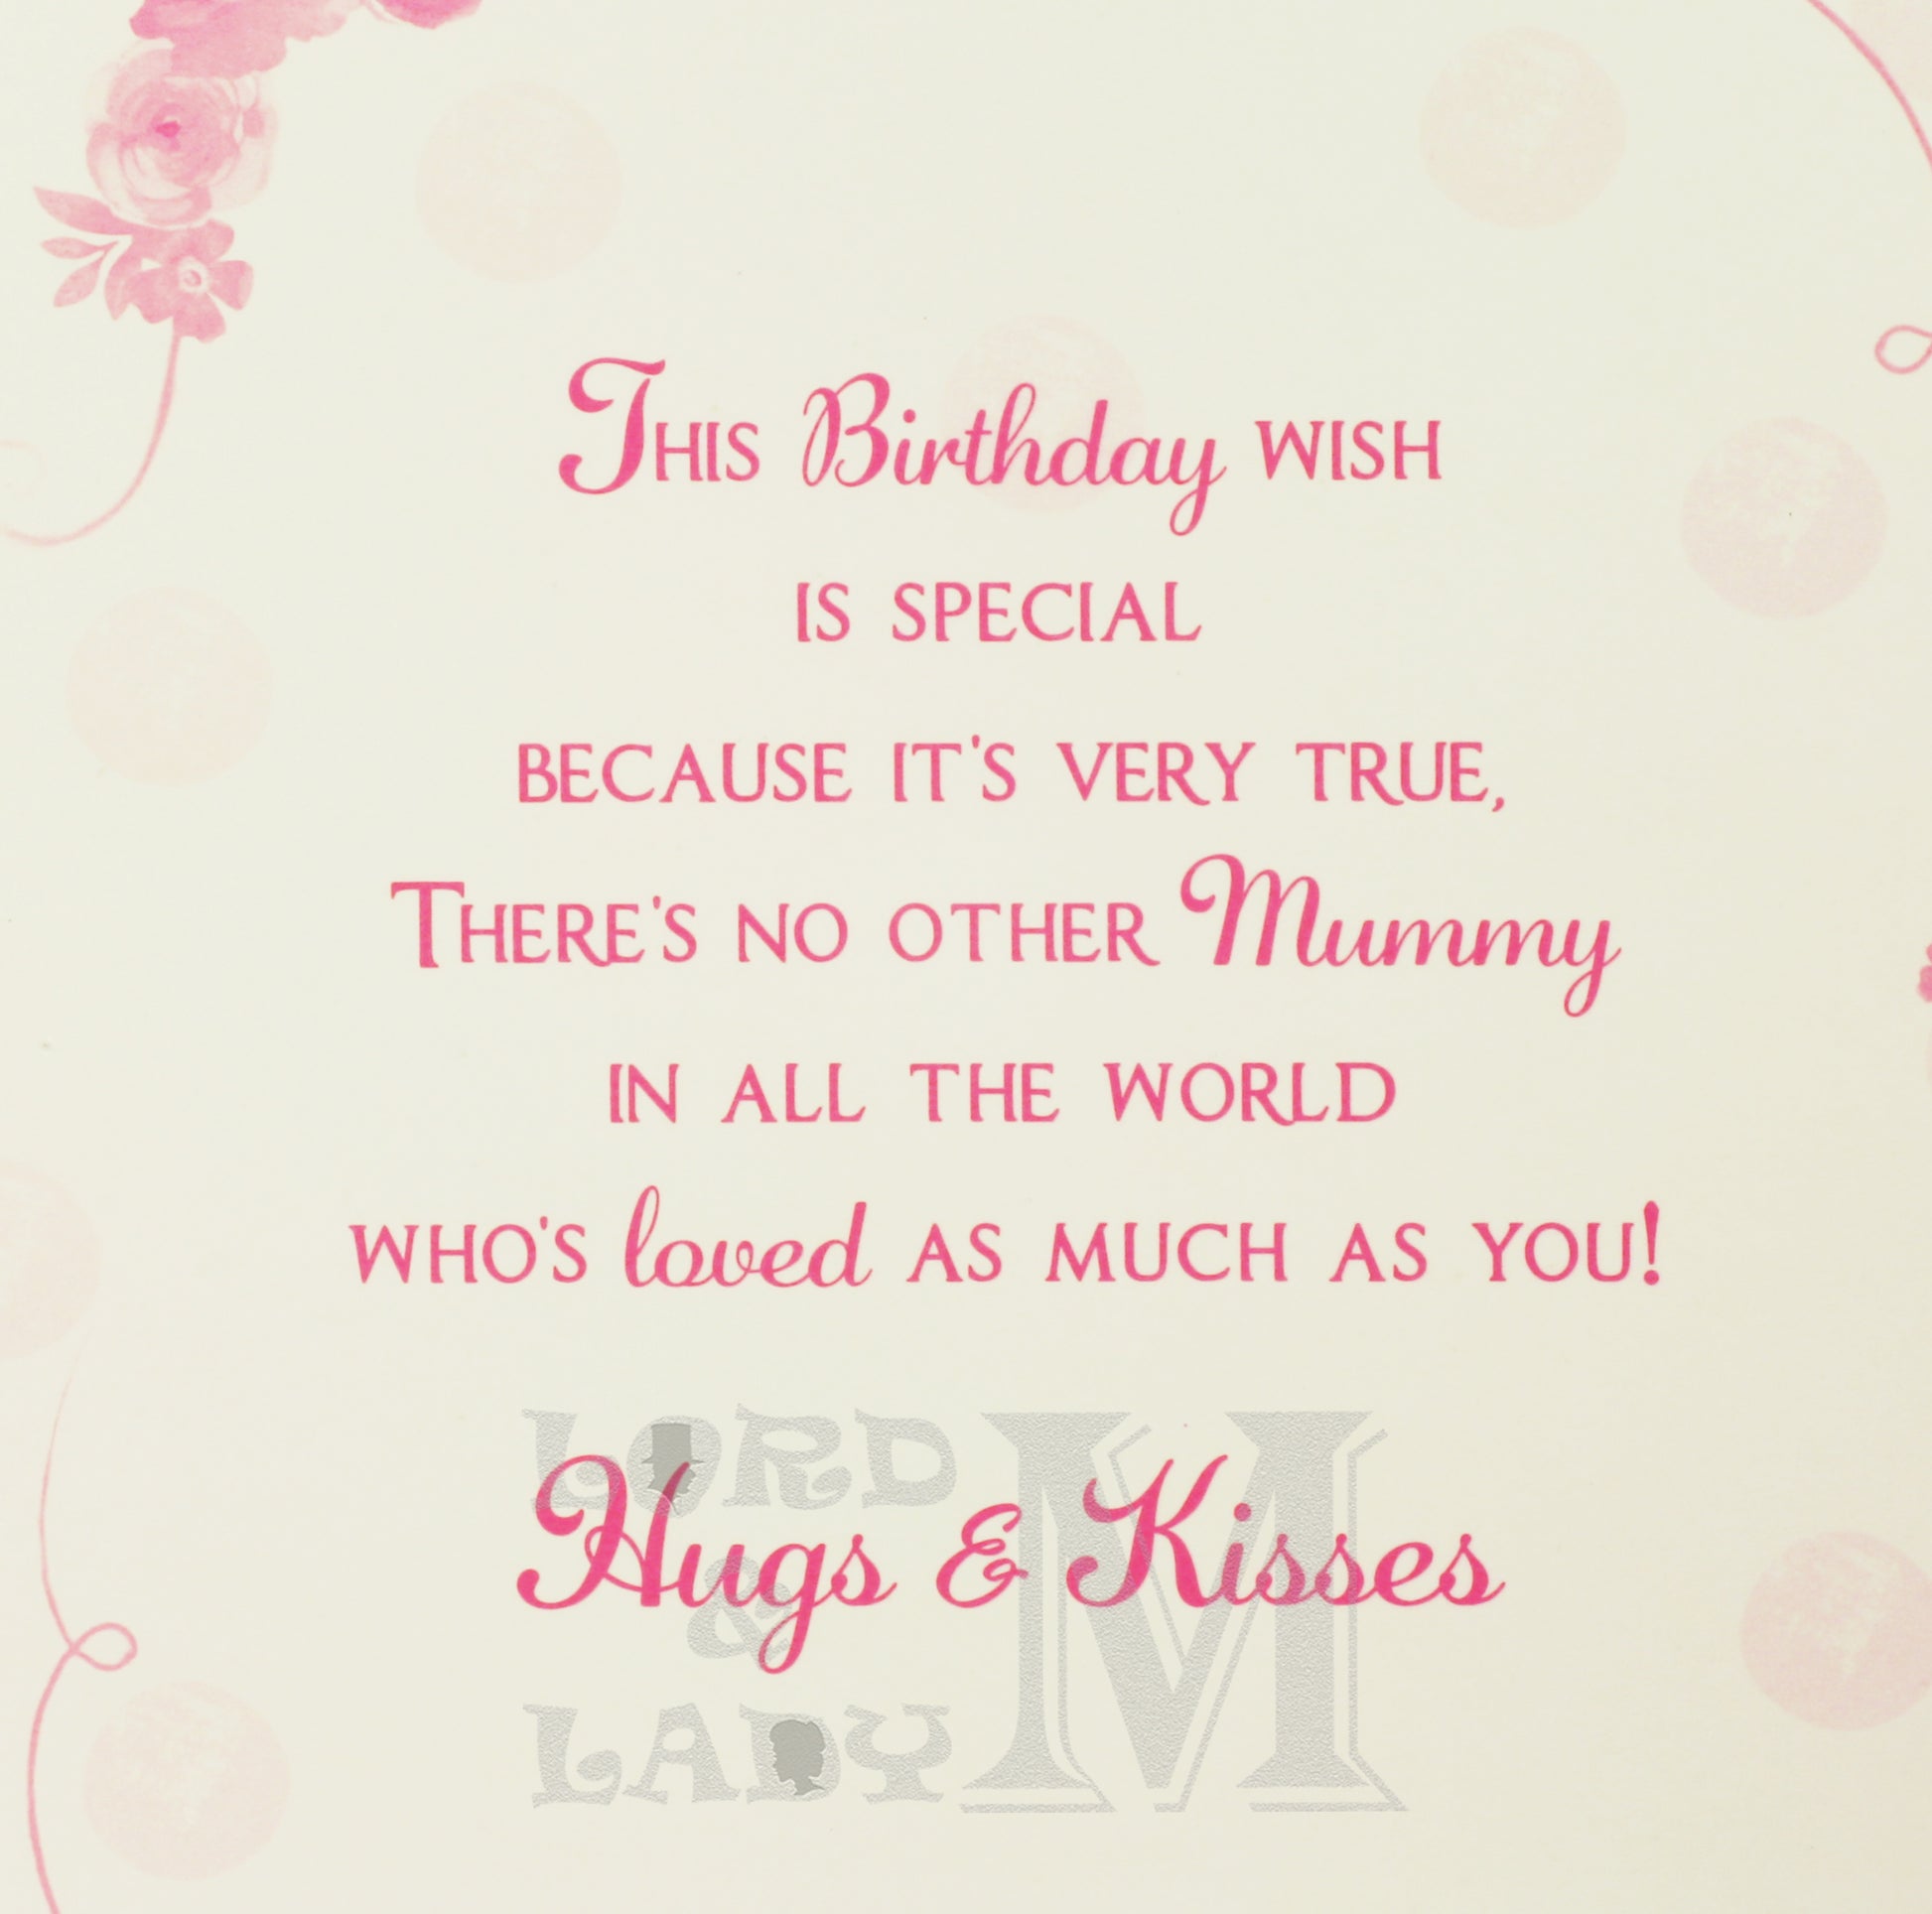 19cm - To A Very Special Mummy Wishing You A - BGC